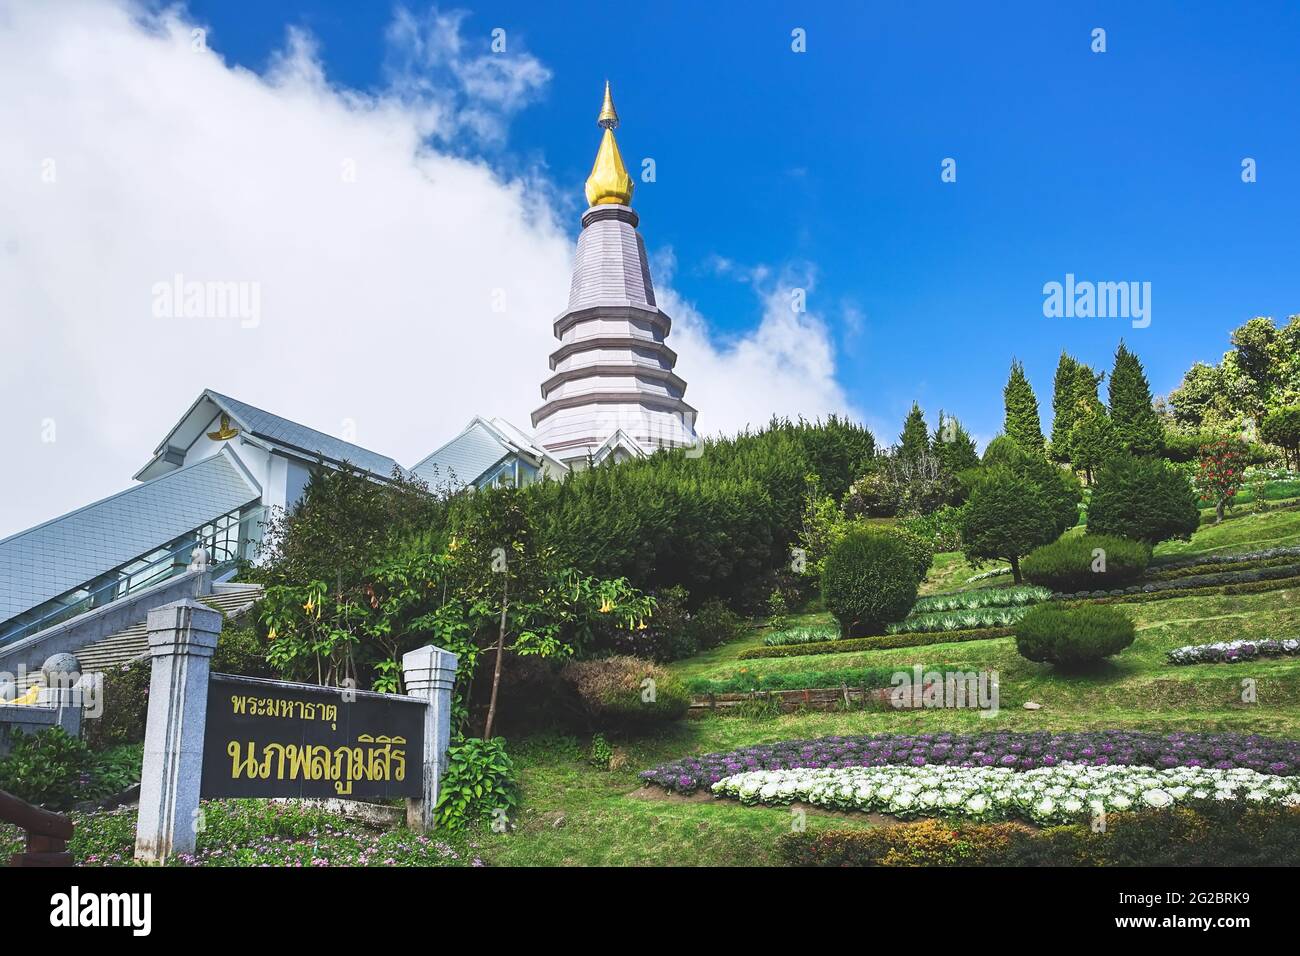 The Great Holy Relics Napaphol Bhumisiri pagoda with Thai name sign in Chiang Mai, Thailand. (Translation:Napaphol Bhumisiri pagoda) Stock Photo